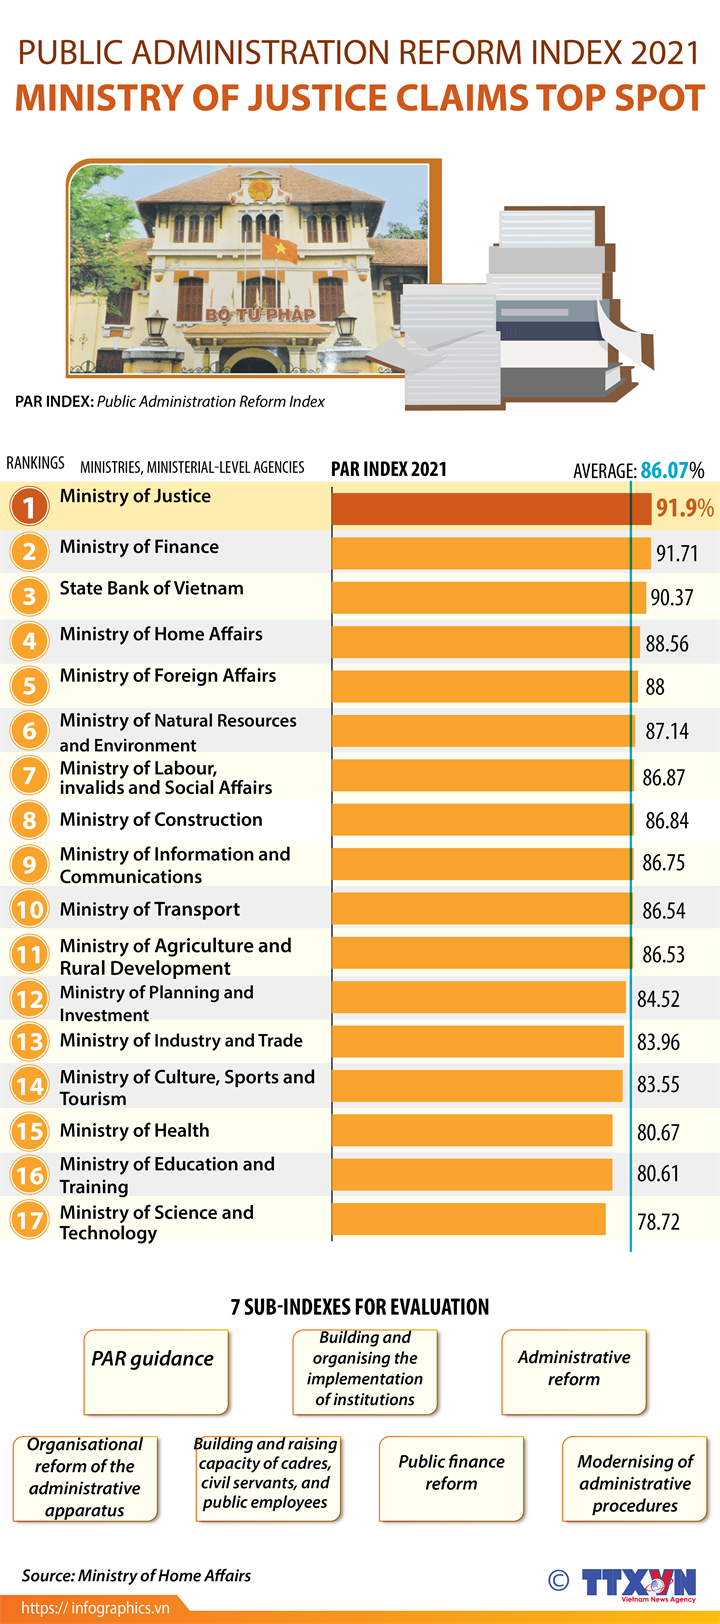 Ministry of Justice tops Public Administration Reform Index